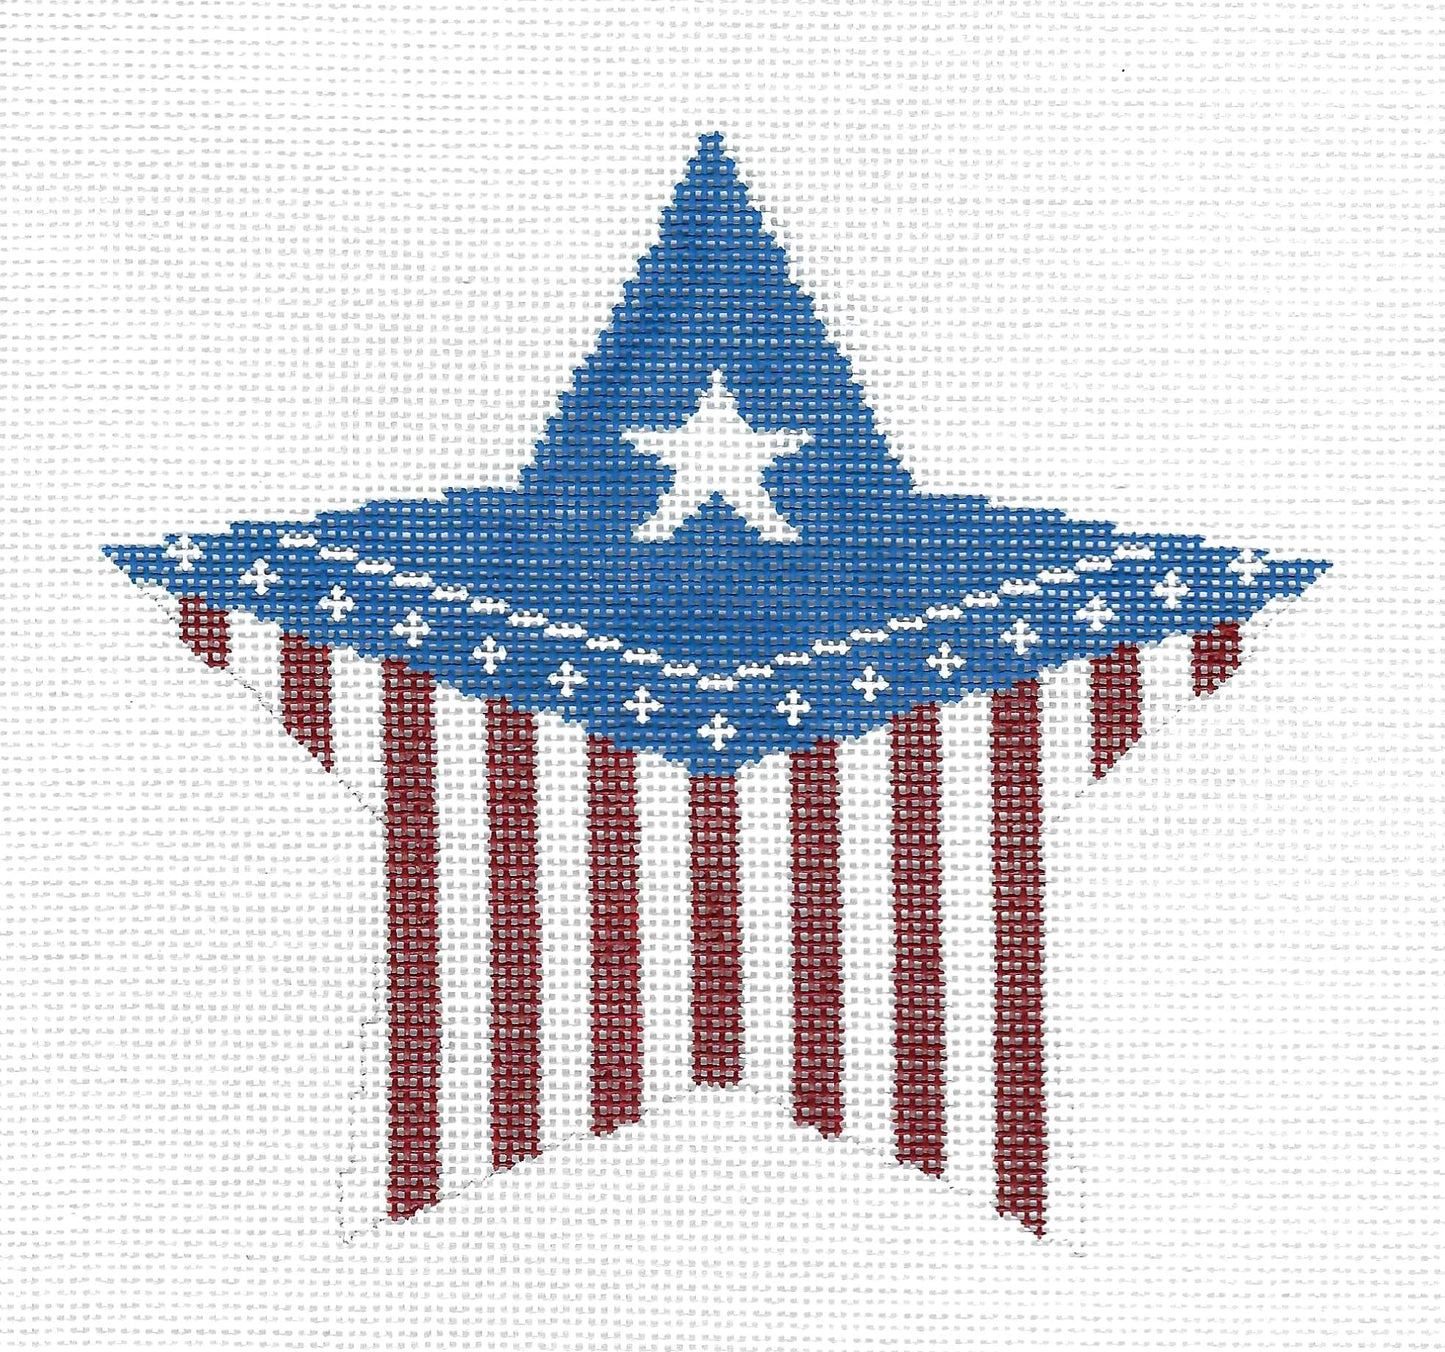 Canvas ~ Patriotic Red, White & Blue Star handpainted Needlepoint Canvas by Silver Needle